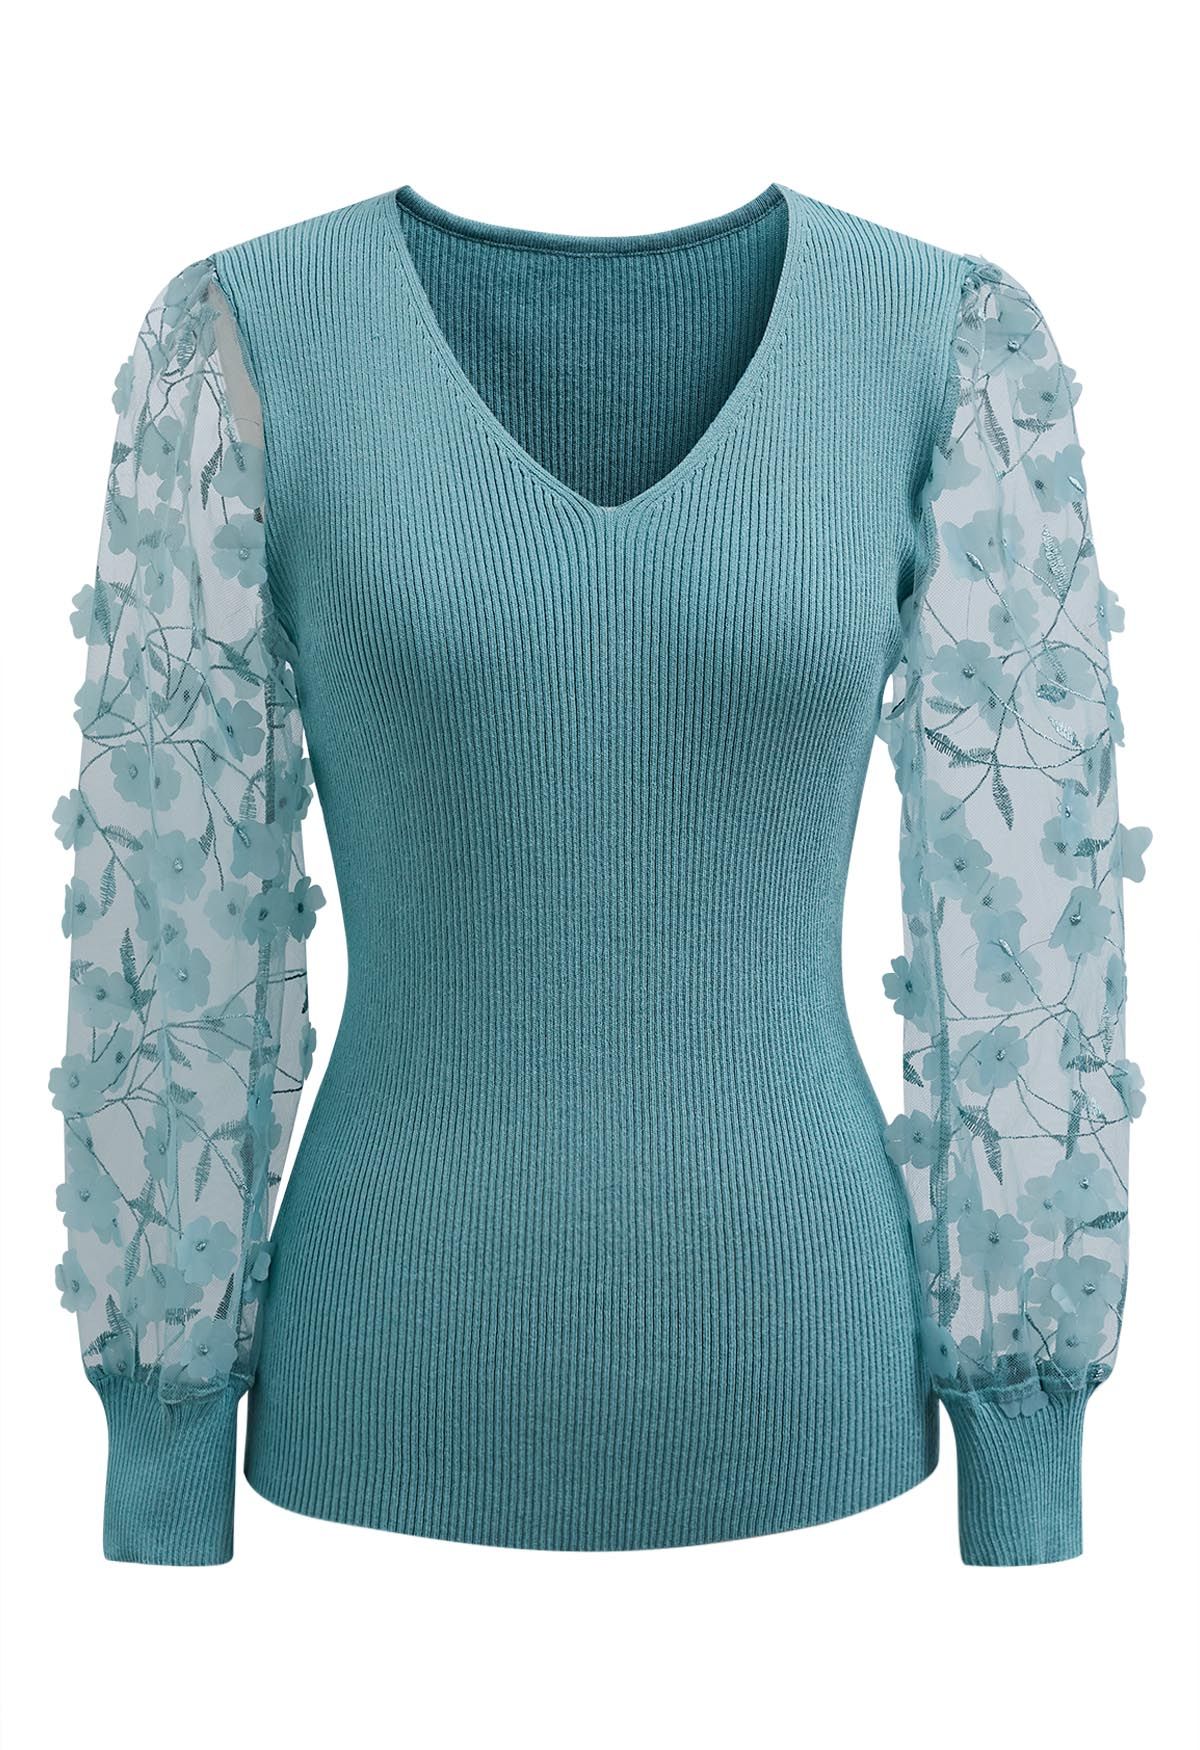 3D Floret Mesh Sleeves Spliced Knit Top in Teal - Retro, Indie and Unique  Fashion